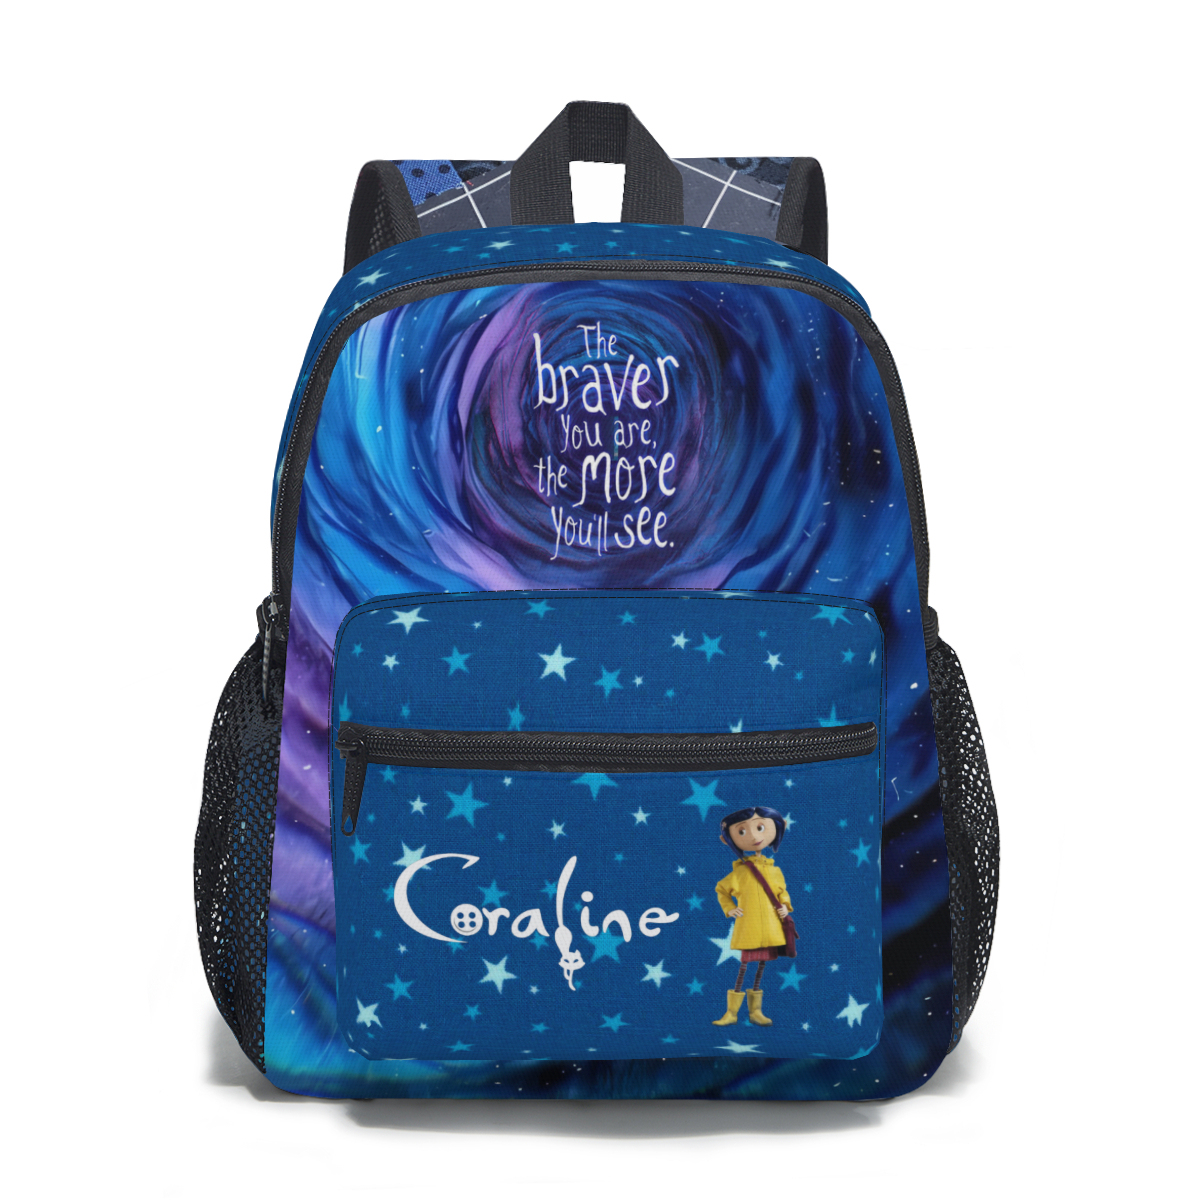 Custom Coraline Student Schoolbag Inspired in Movie Character – Polyester Backpack for kids/youth Cool Kiddo 20